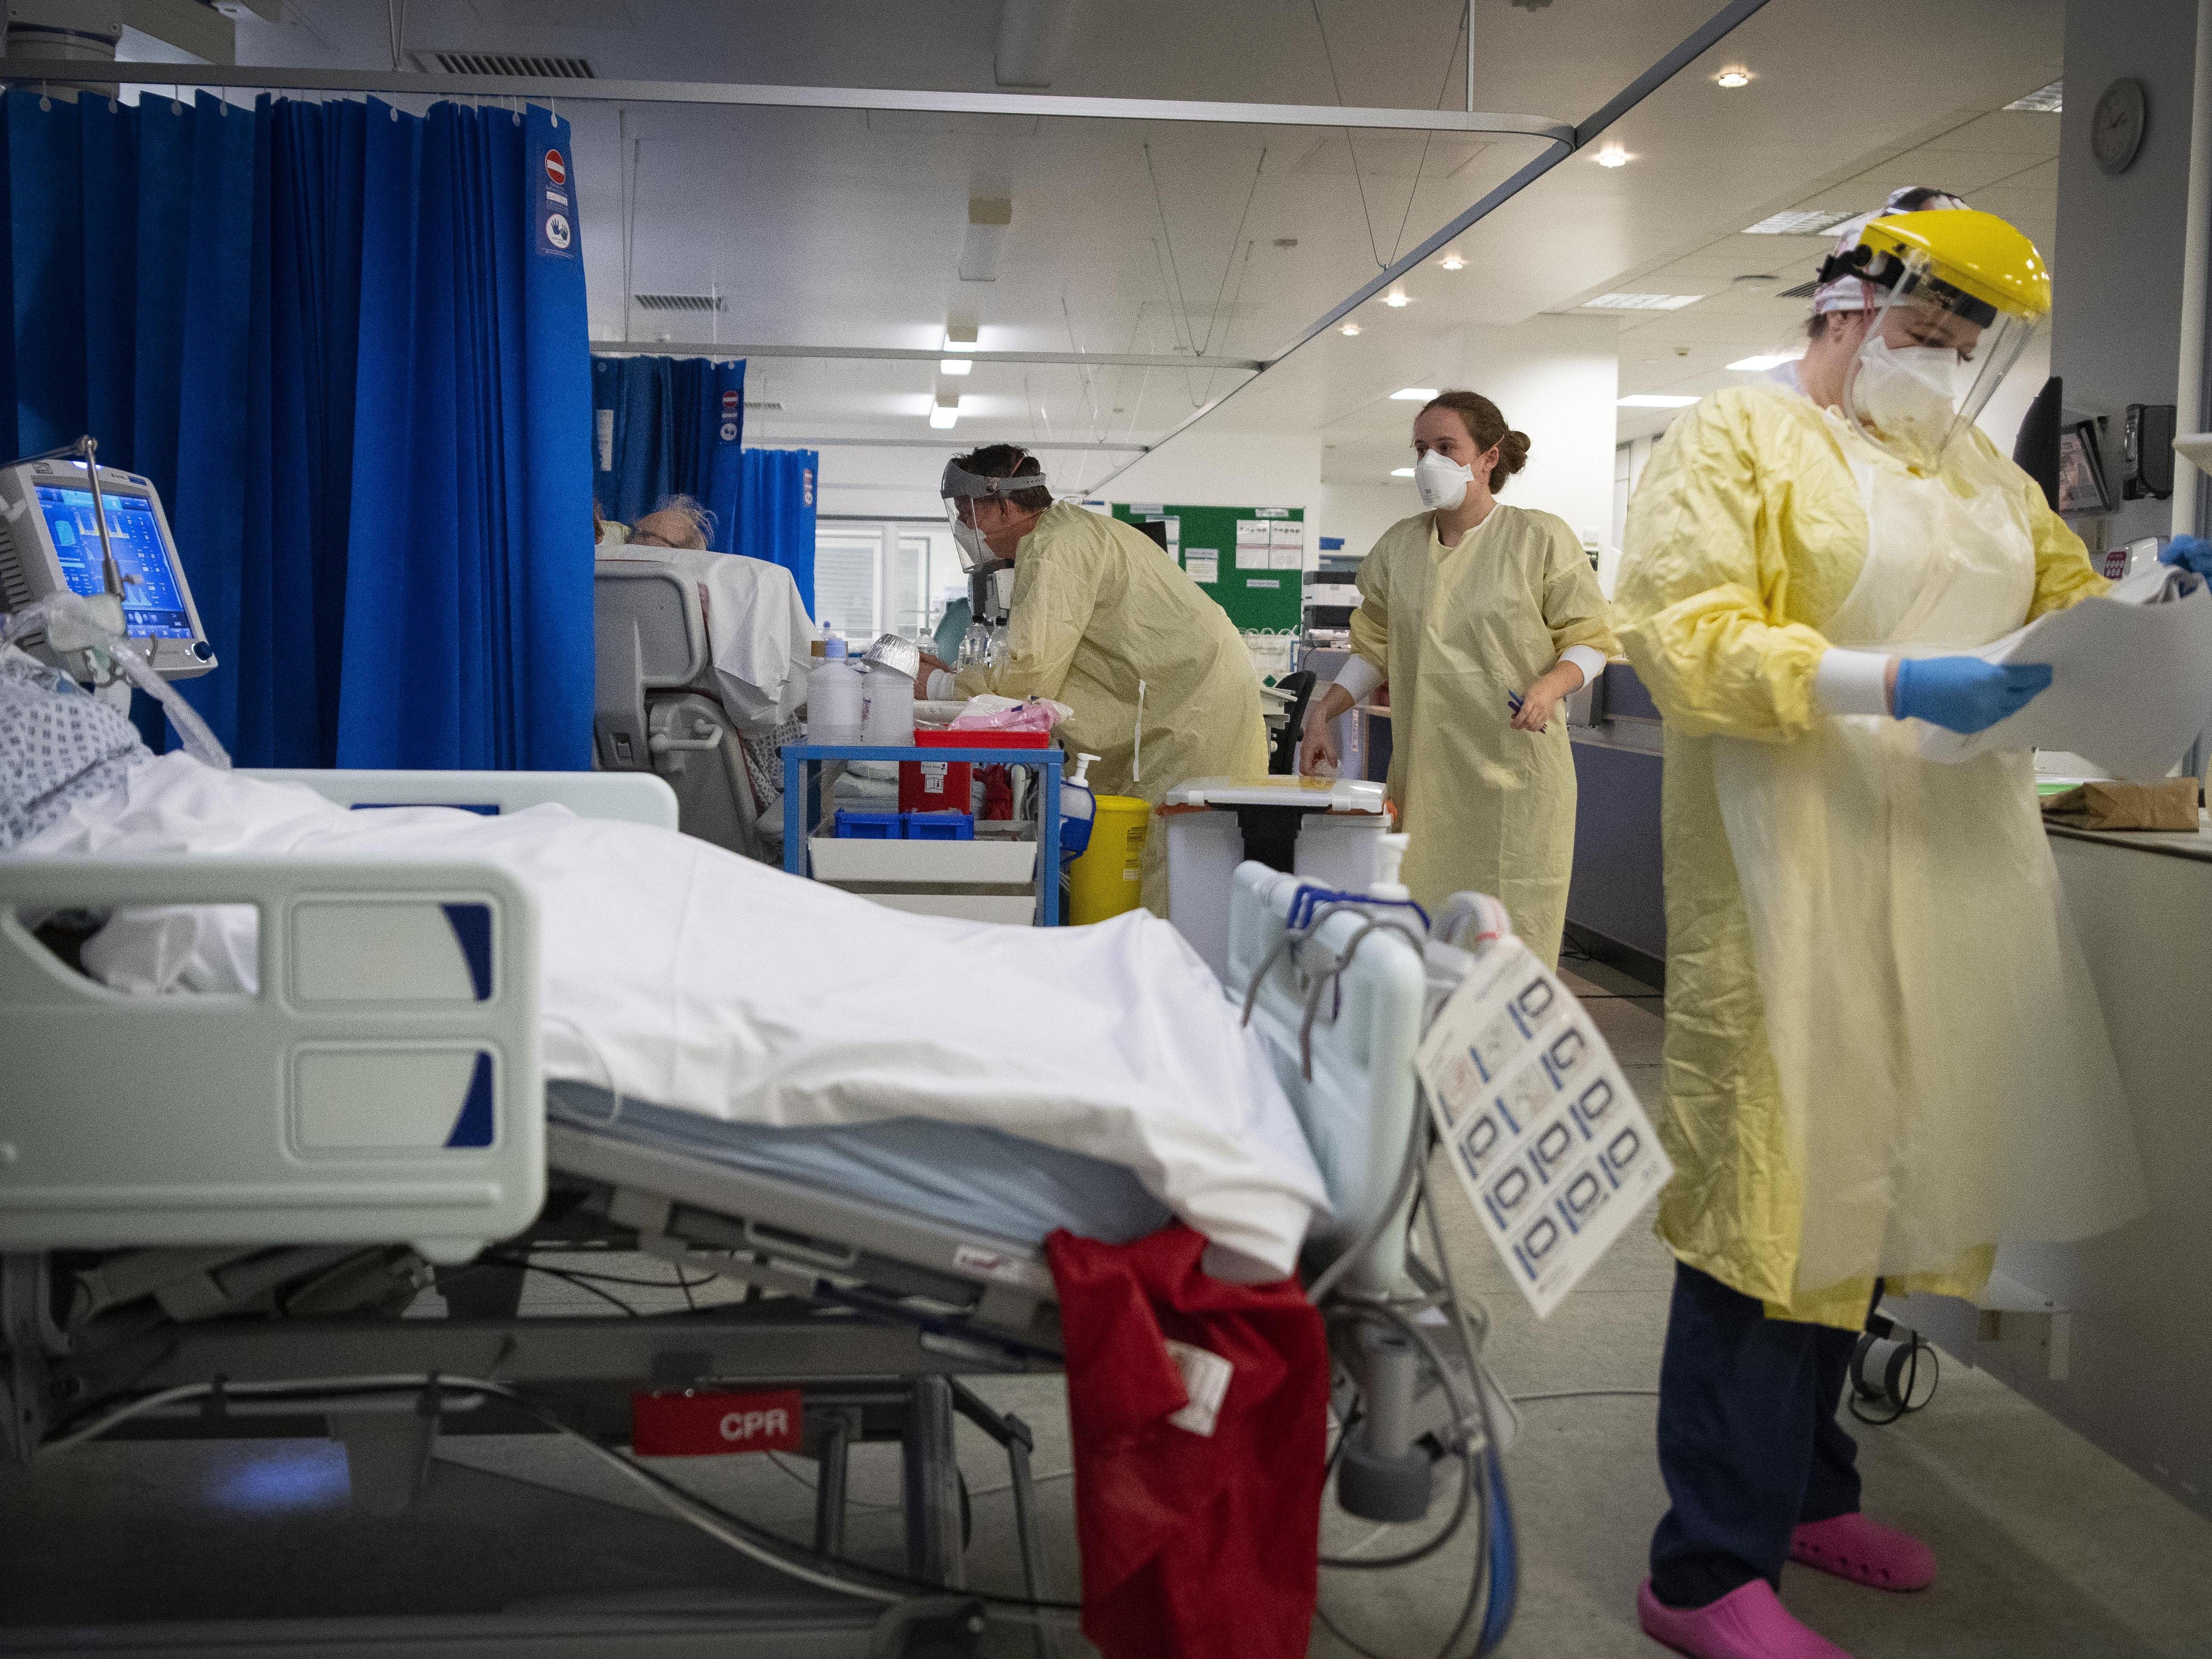 Nurses treat patients in the ICU (Intensive Care Unit) at St George’s Hospital in Tooting, southwest London